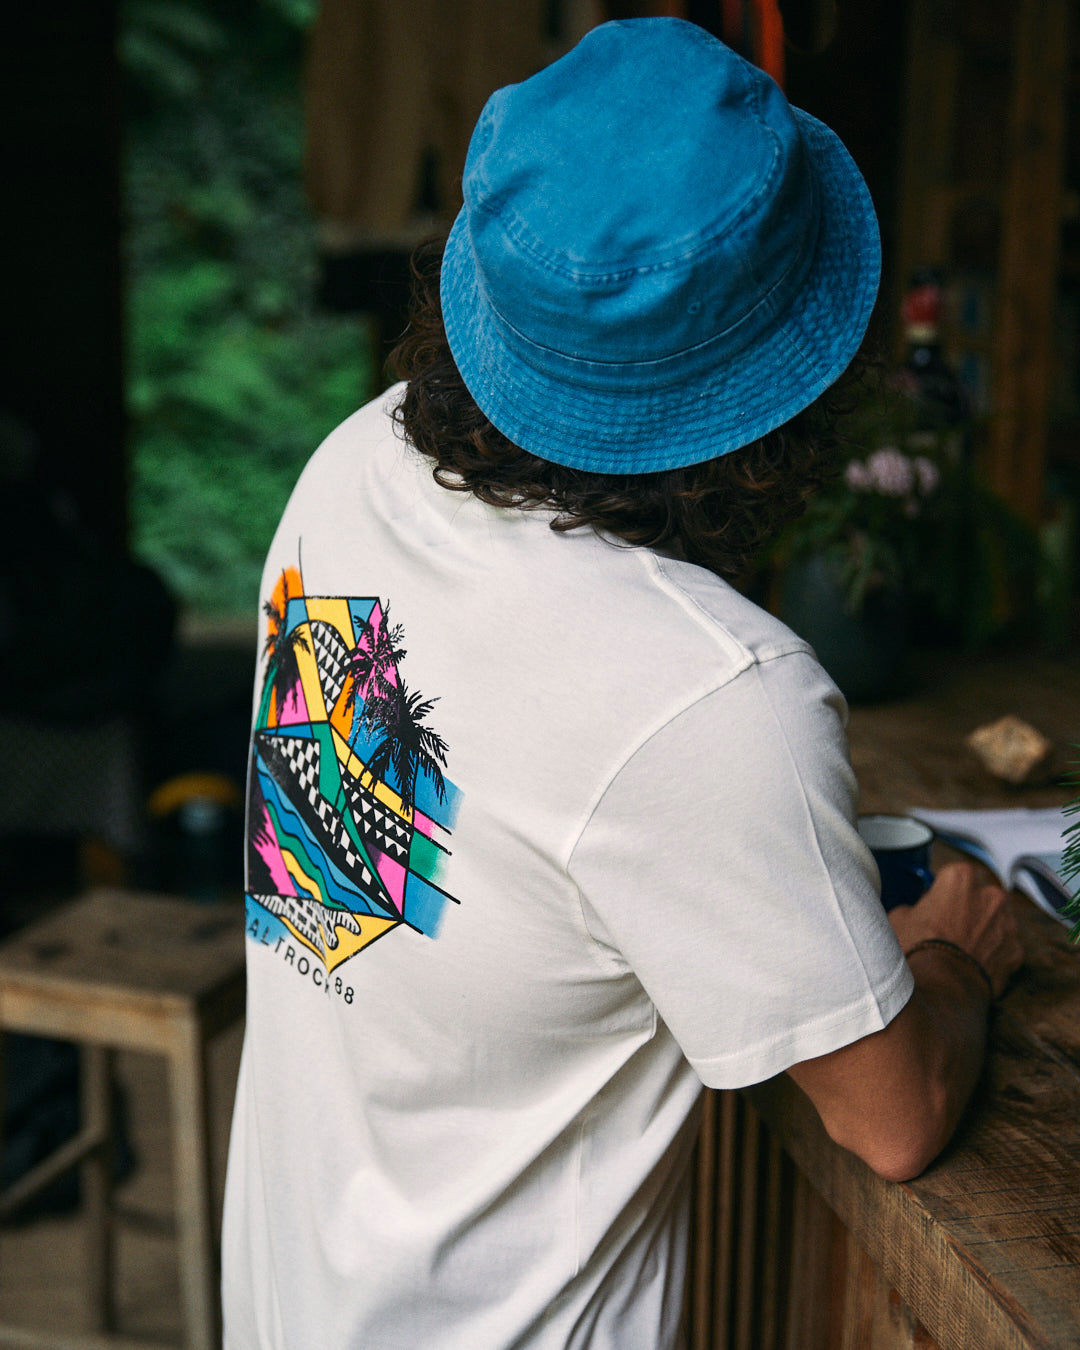 A person in a blue bucket hat with curly hair sits at a wooden table wearing the Geo Palms Men's T-Shirt from Saltrock, made of 100% cotton and featuring vibrant graphics of a sunset and palm trees on the back.